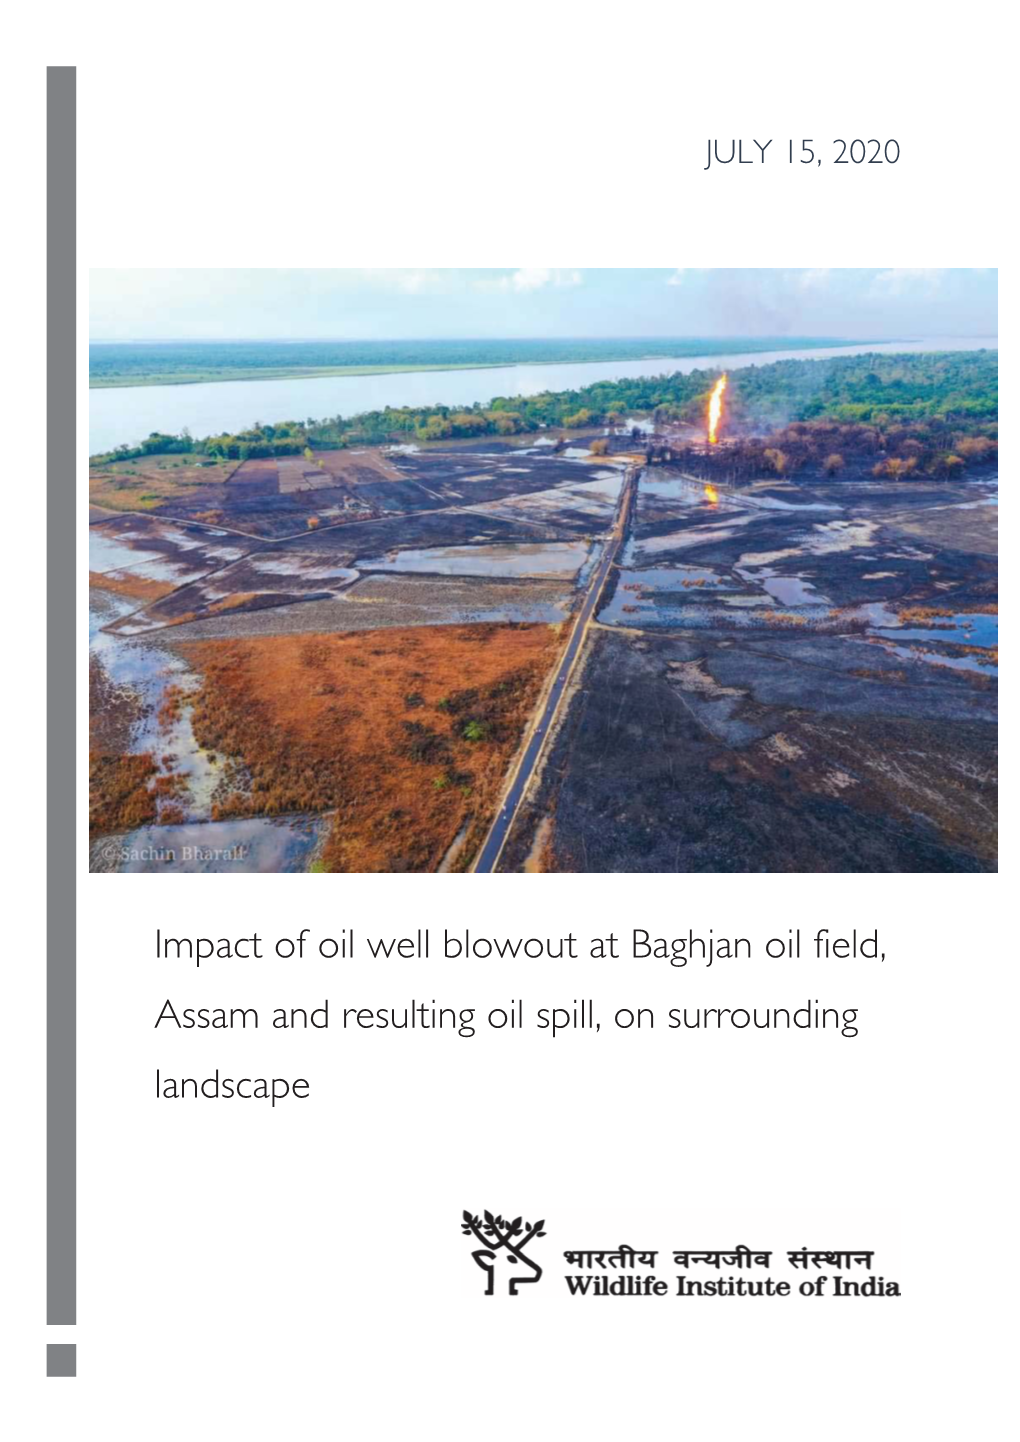 Impact of Oil Well Blowout at Baghjan Oil Field, Assam and Resulting Oil Spill, on Surrounding Landscape